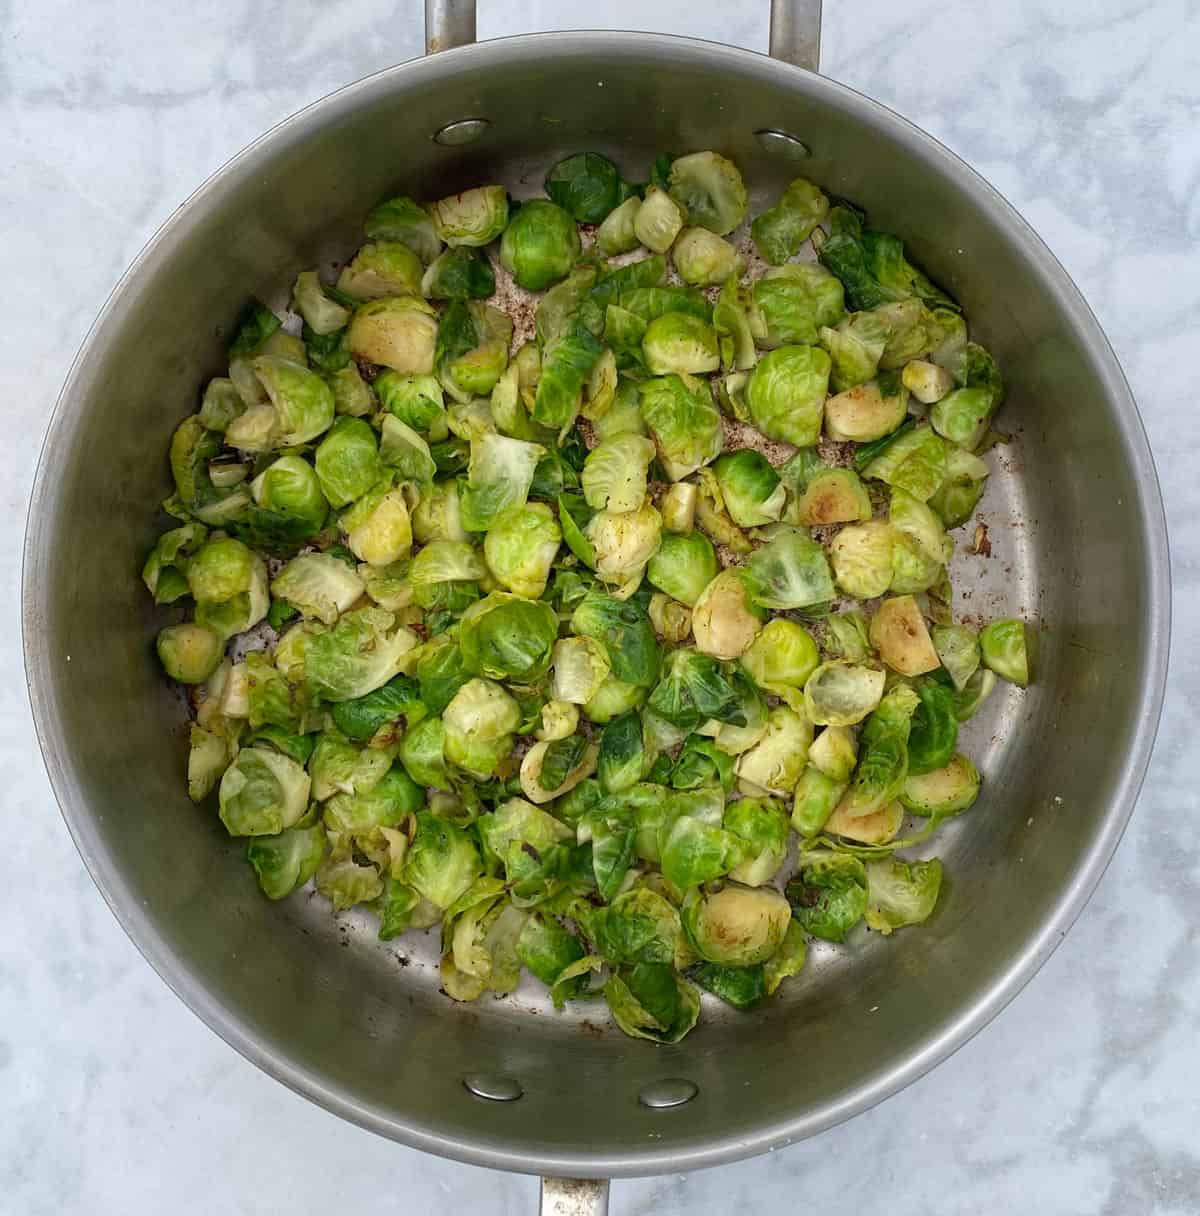 pan seared brussels sprouts.